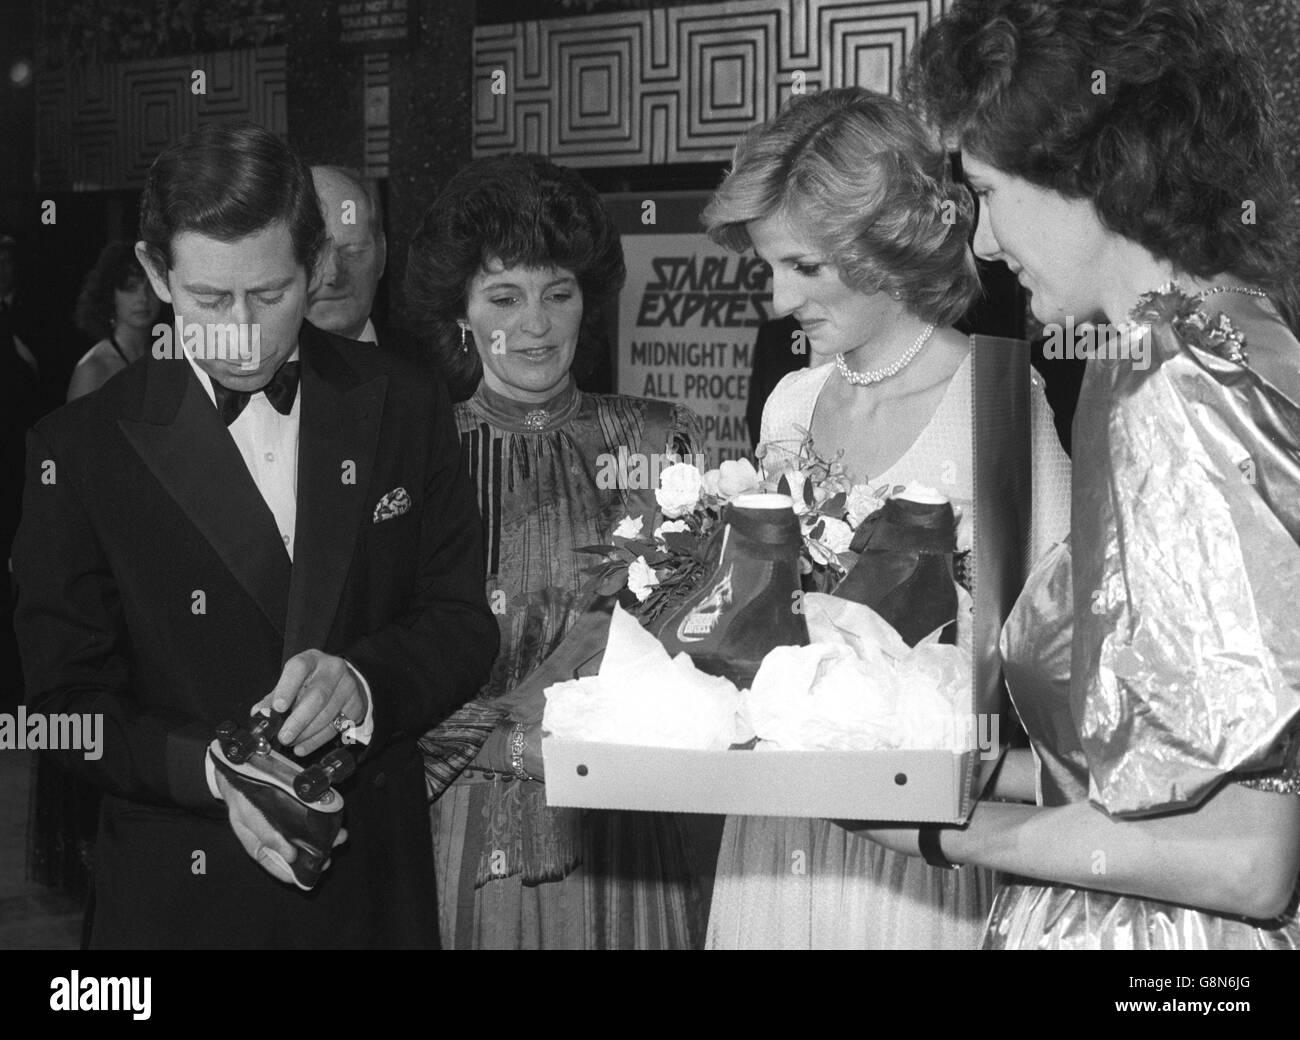 The Prince and Princes of Wales look at a couple of pairs of roller skates destined for their sons during a Gala performance of 'Starlight Express' at the Apollo Victoria Theatre, London. Stock Photo